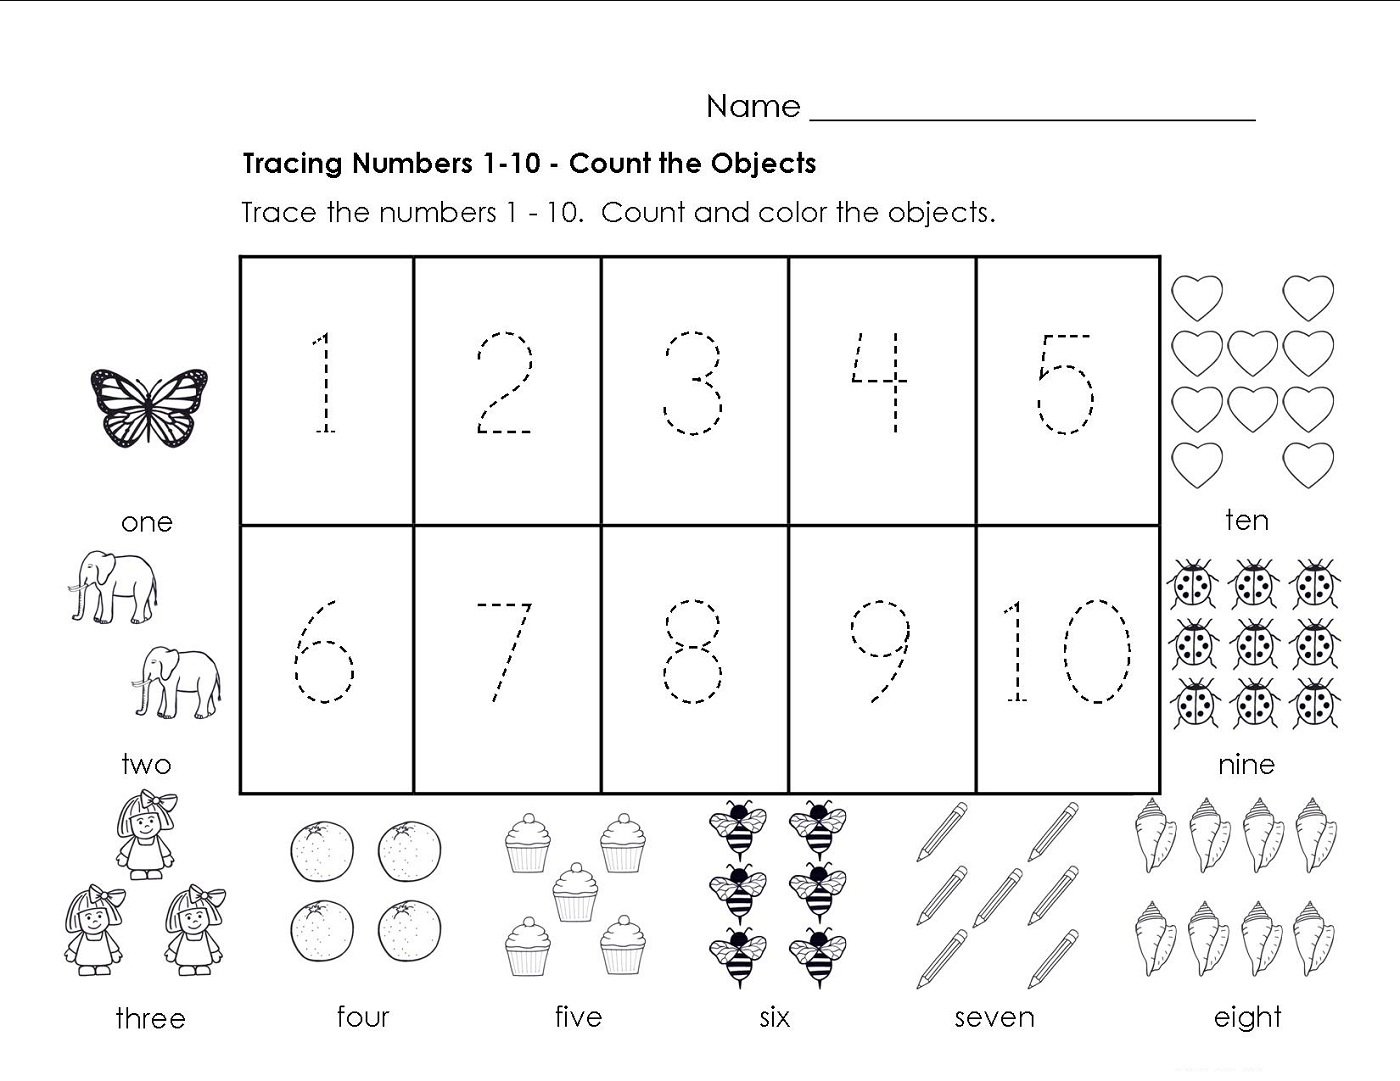 Traceable Numbers 1-10 Worksheets To Print | Activity Shelter - Printable Number Puzzles 1-10